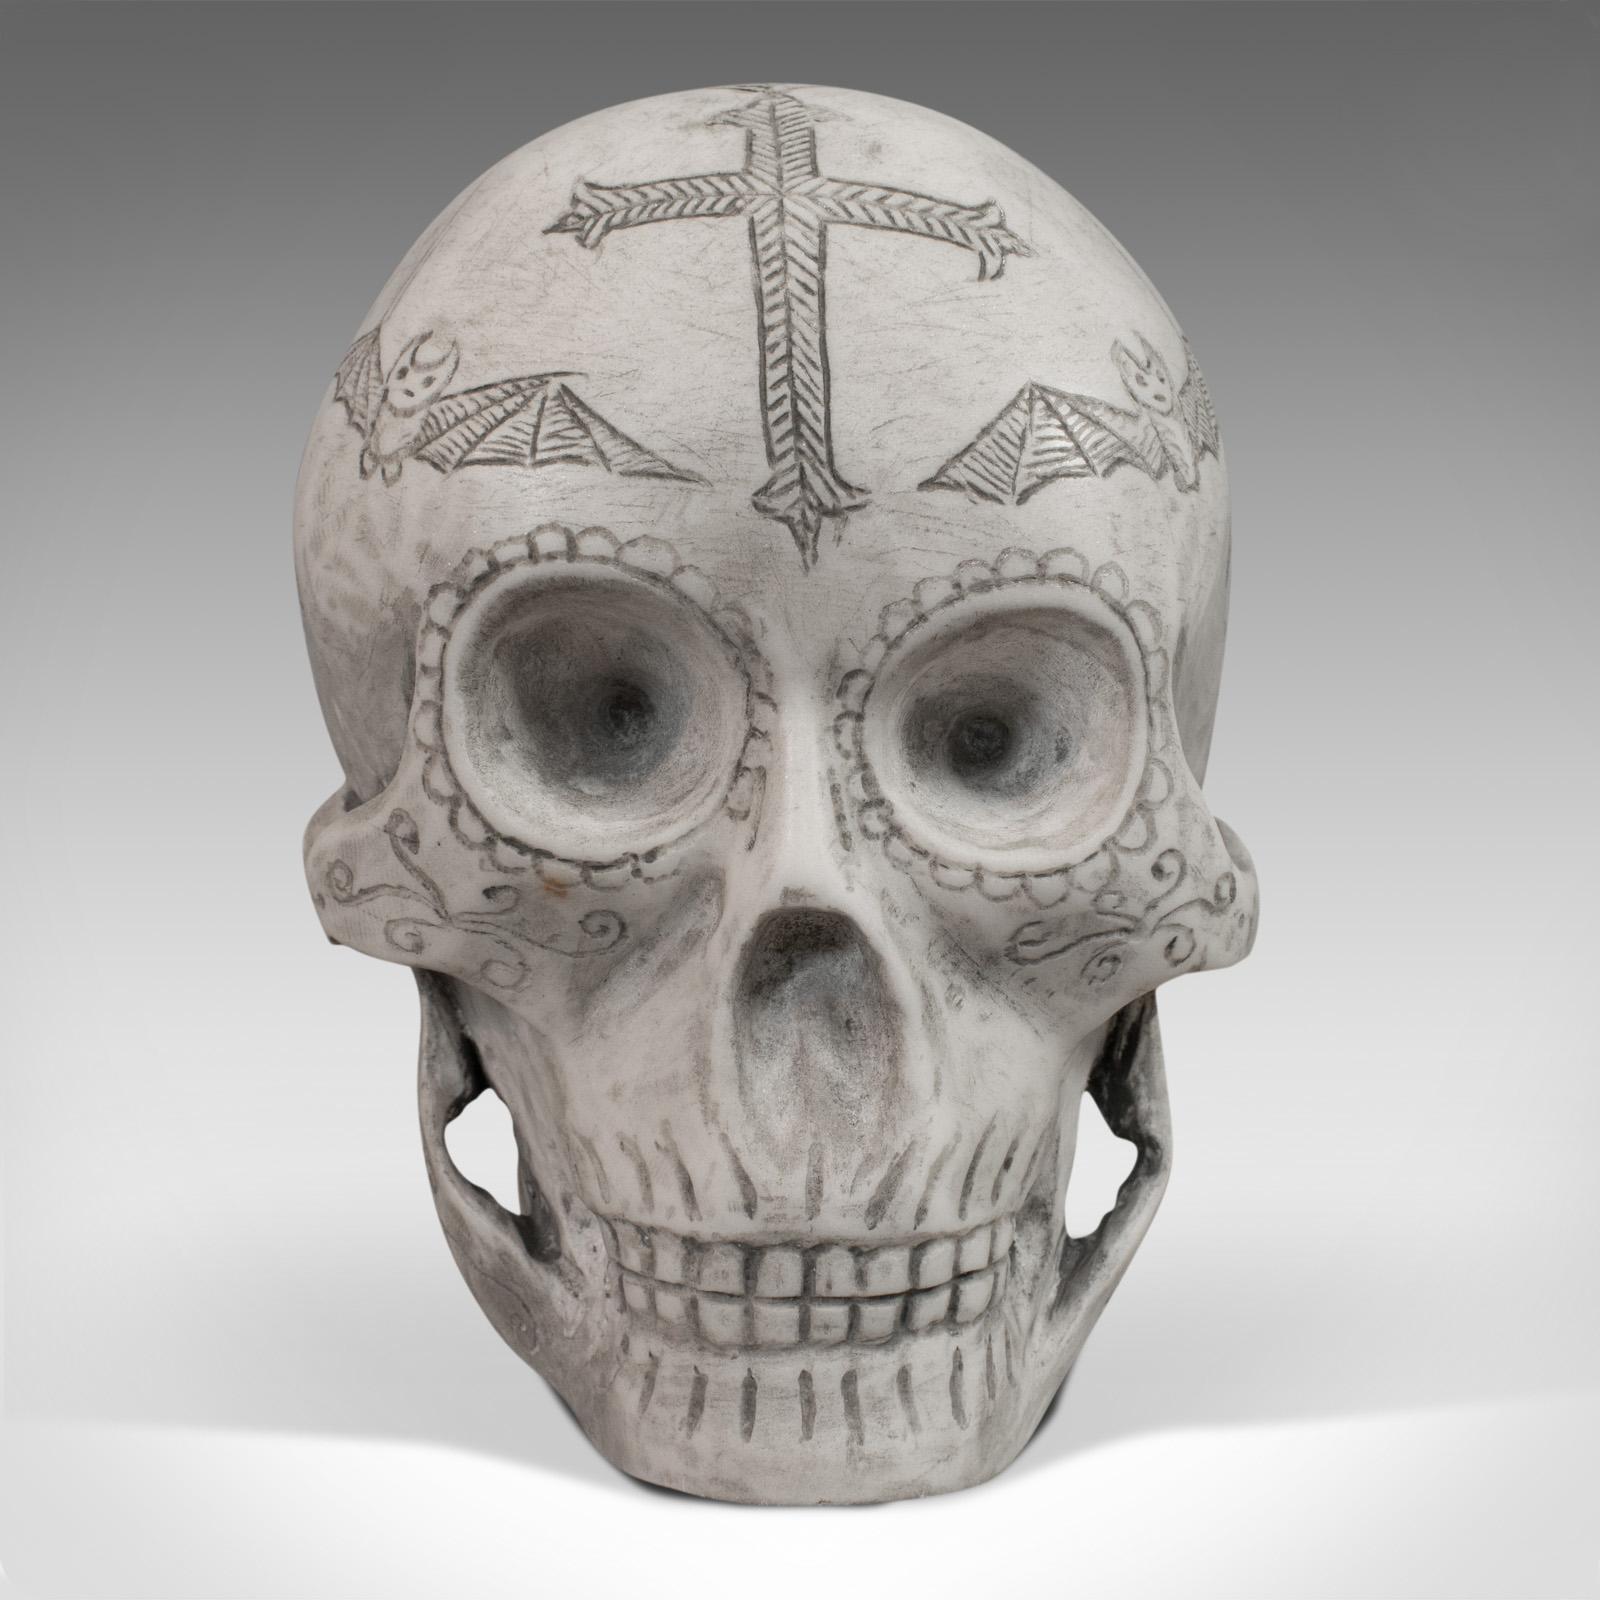 This is a vintage decorated skull. An English marble ornament with hand-finished decoration by Dominic Hurley, dating to the late 20th century.

One of one collector appeal
Displays a desirable aged patina
Substantial form, ideal as a